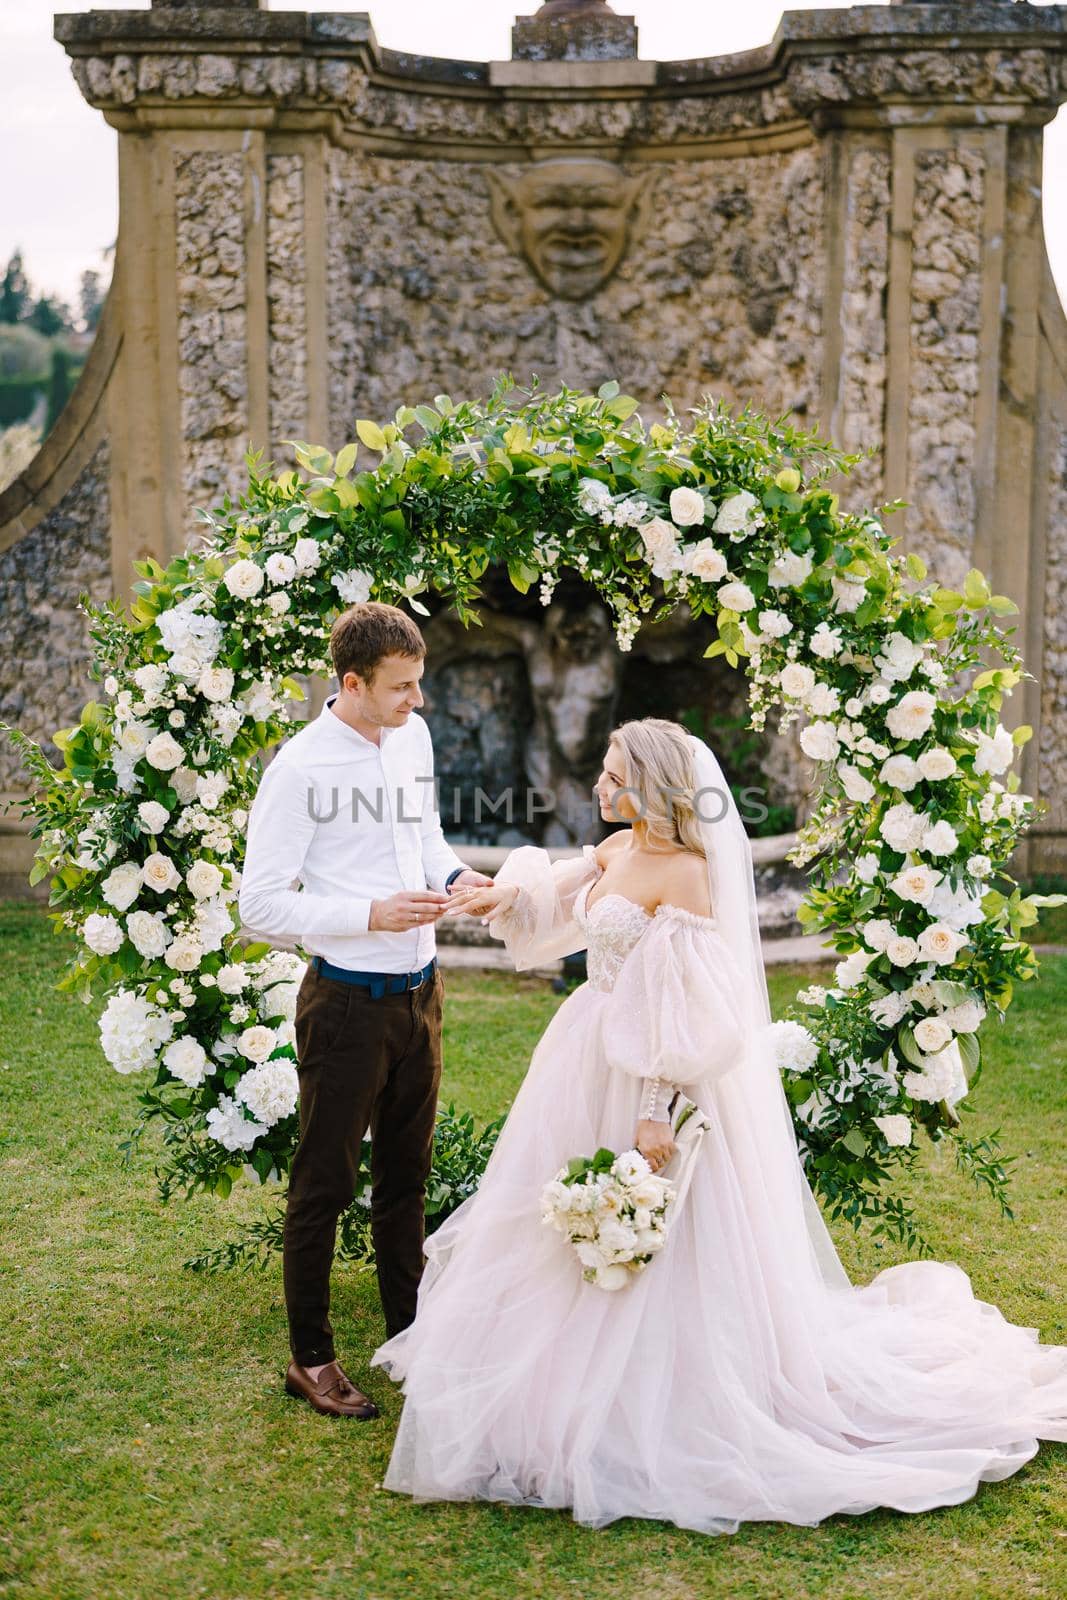 Wedding at an old winery villa in Tuscany, Italy. Round wedding arch decorated with white flowers and greenery in front of an ancient Italian architecture. The groom puts ring on the brides finger.